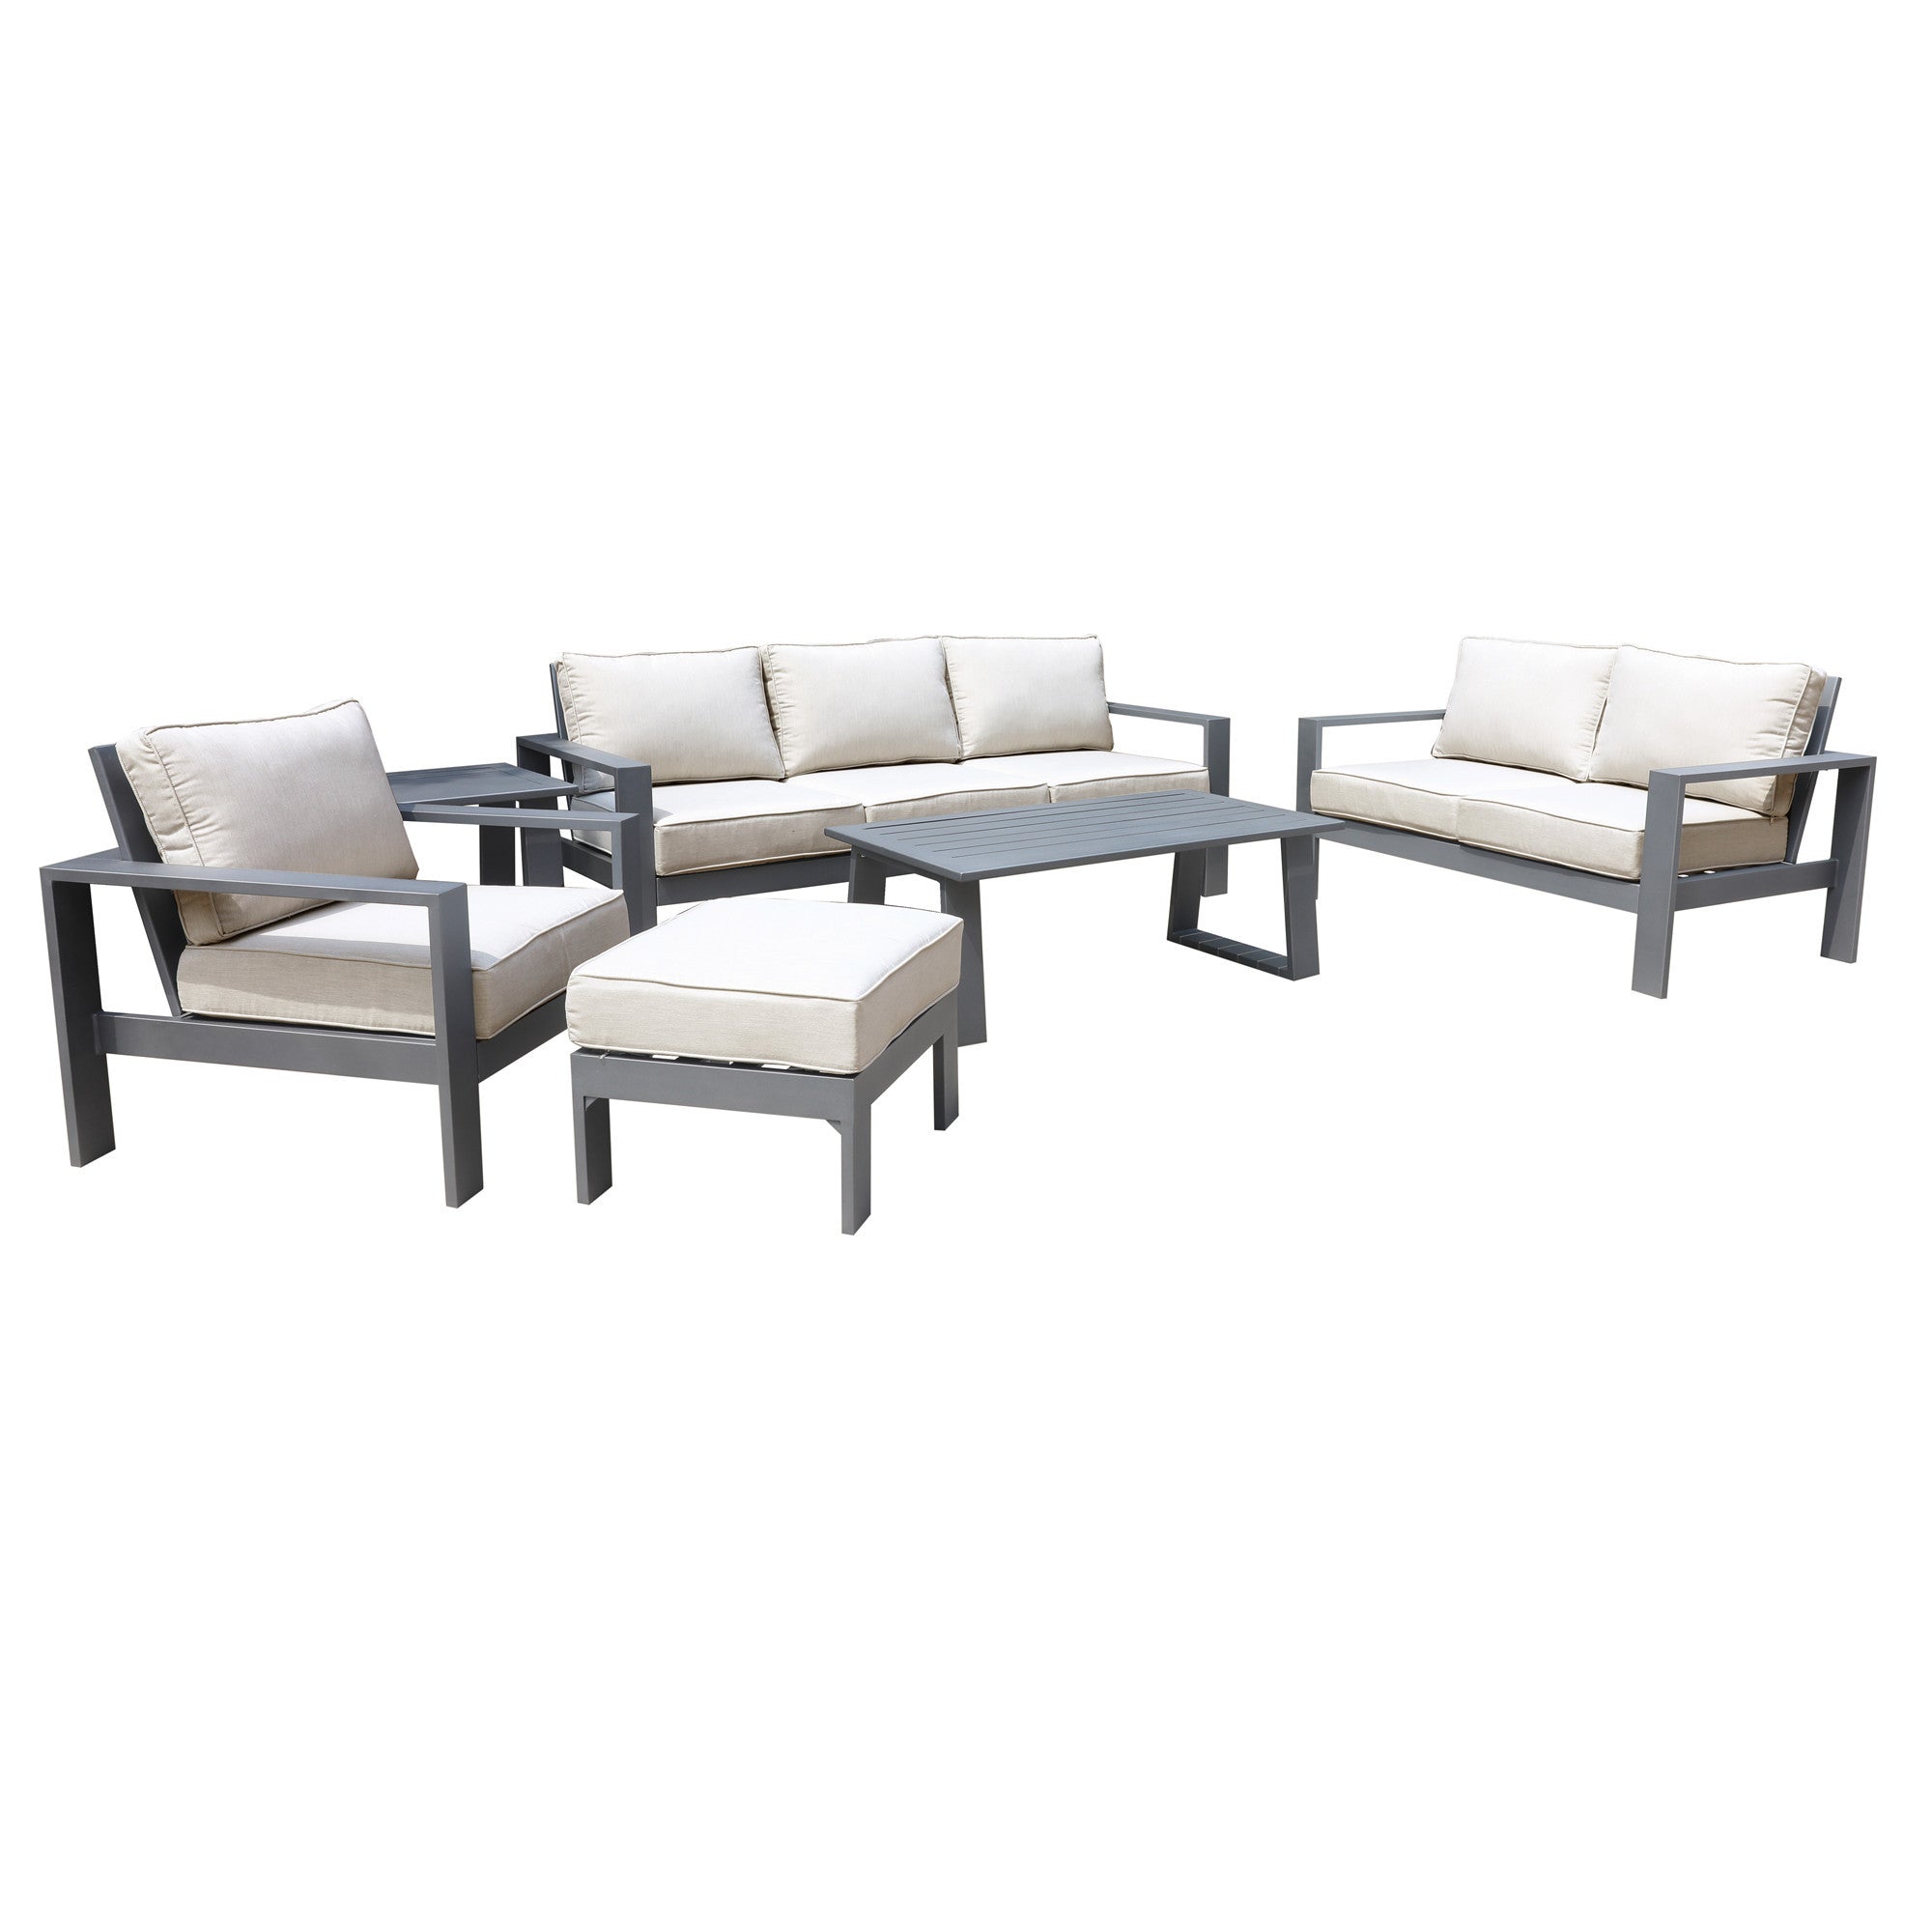 6 Piece Sofa Seating Group with Cushions, Powdered pewter-polyester-aluminum